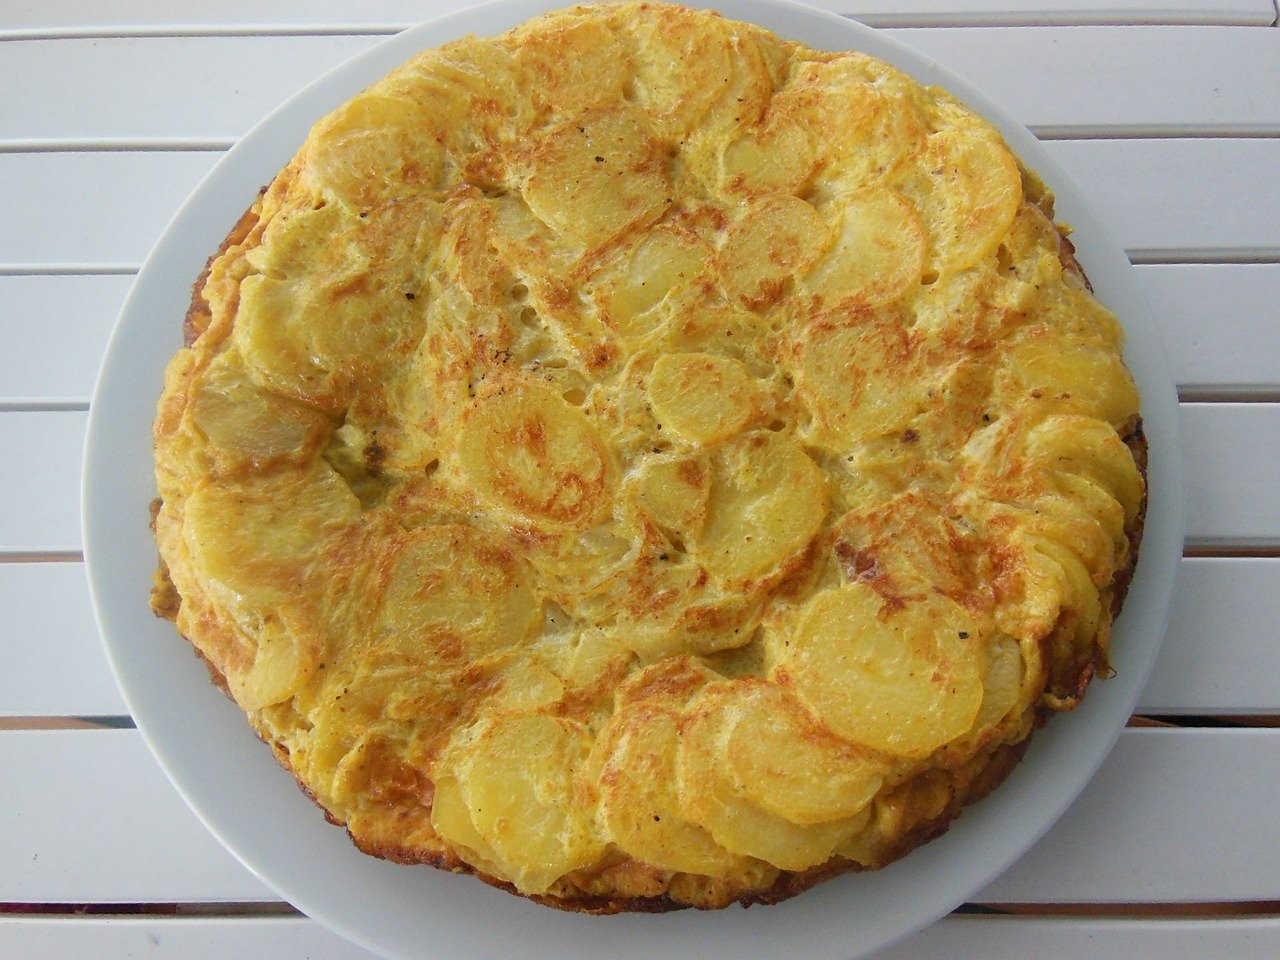 The Tortilla Española, also known as the Spanish omelet, is one of the best Spanish foods to try! Read this article to discover what to eat in Spain, Europe